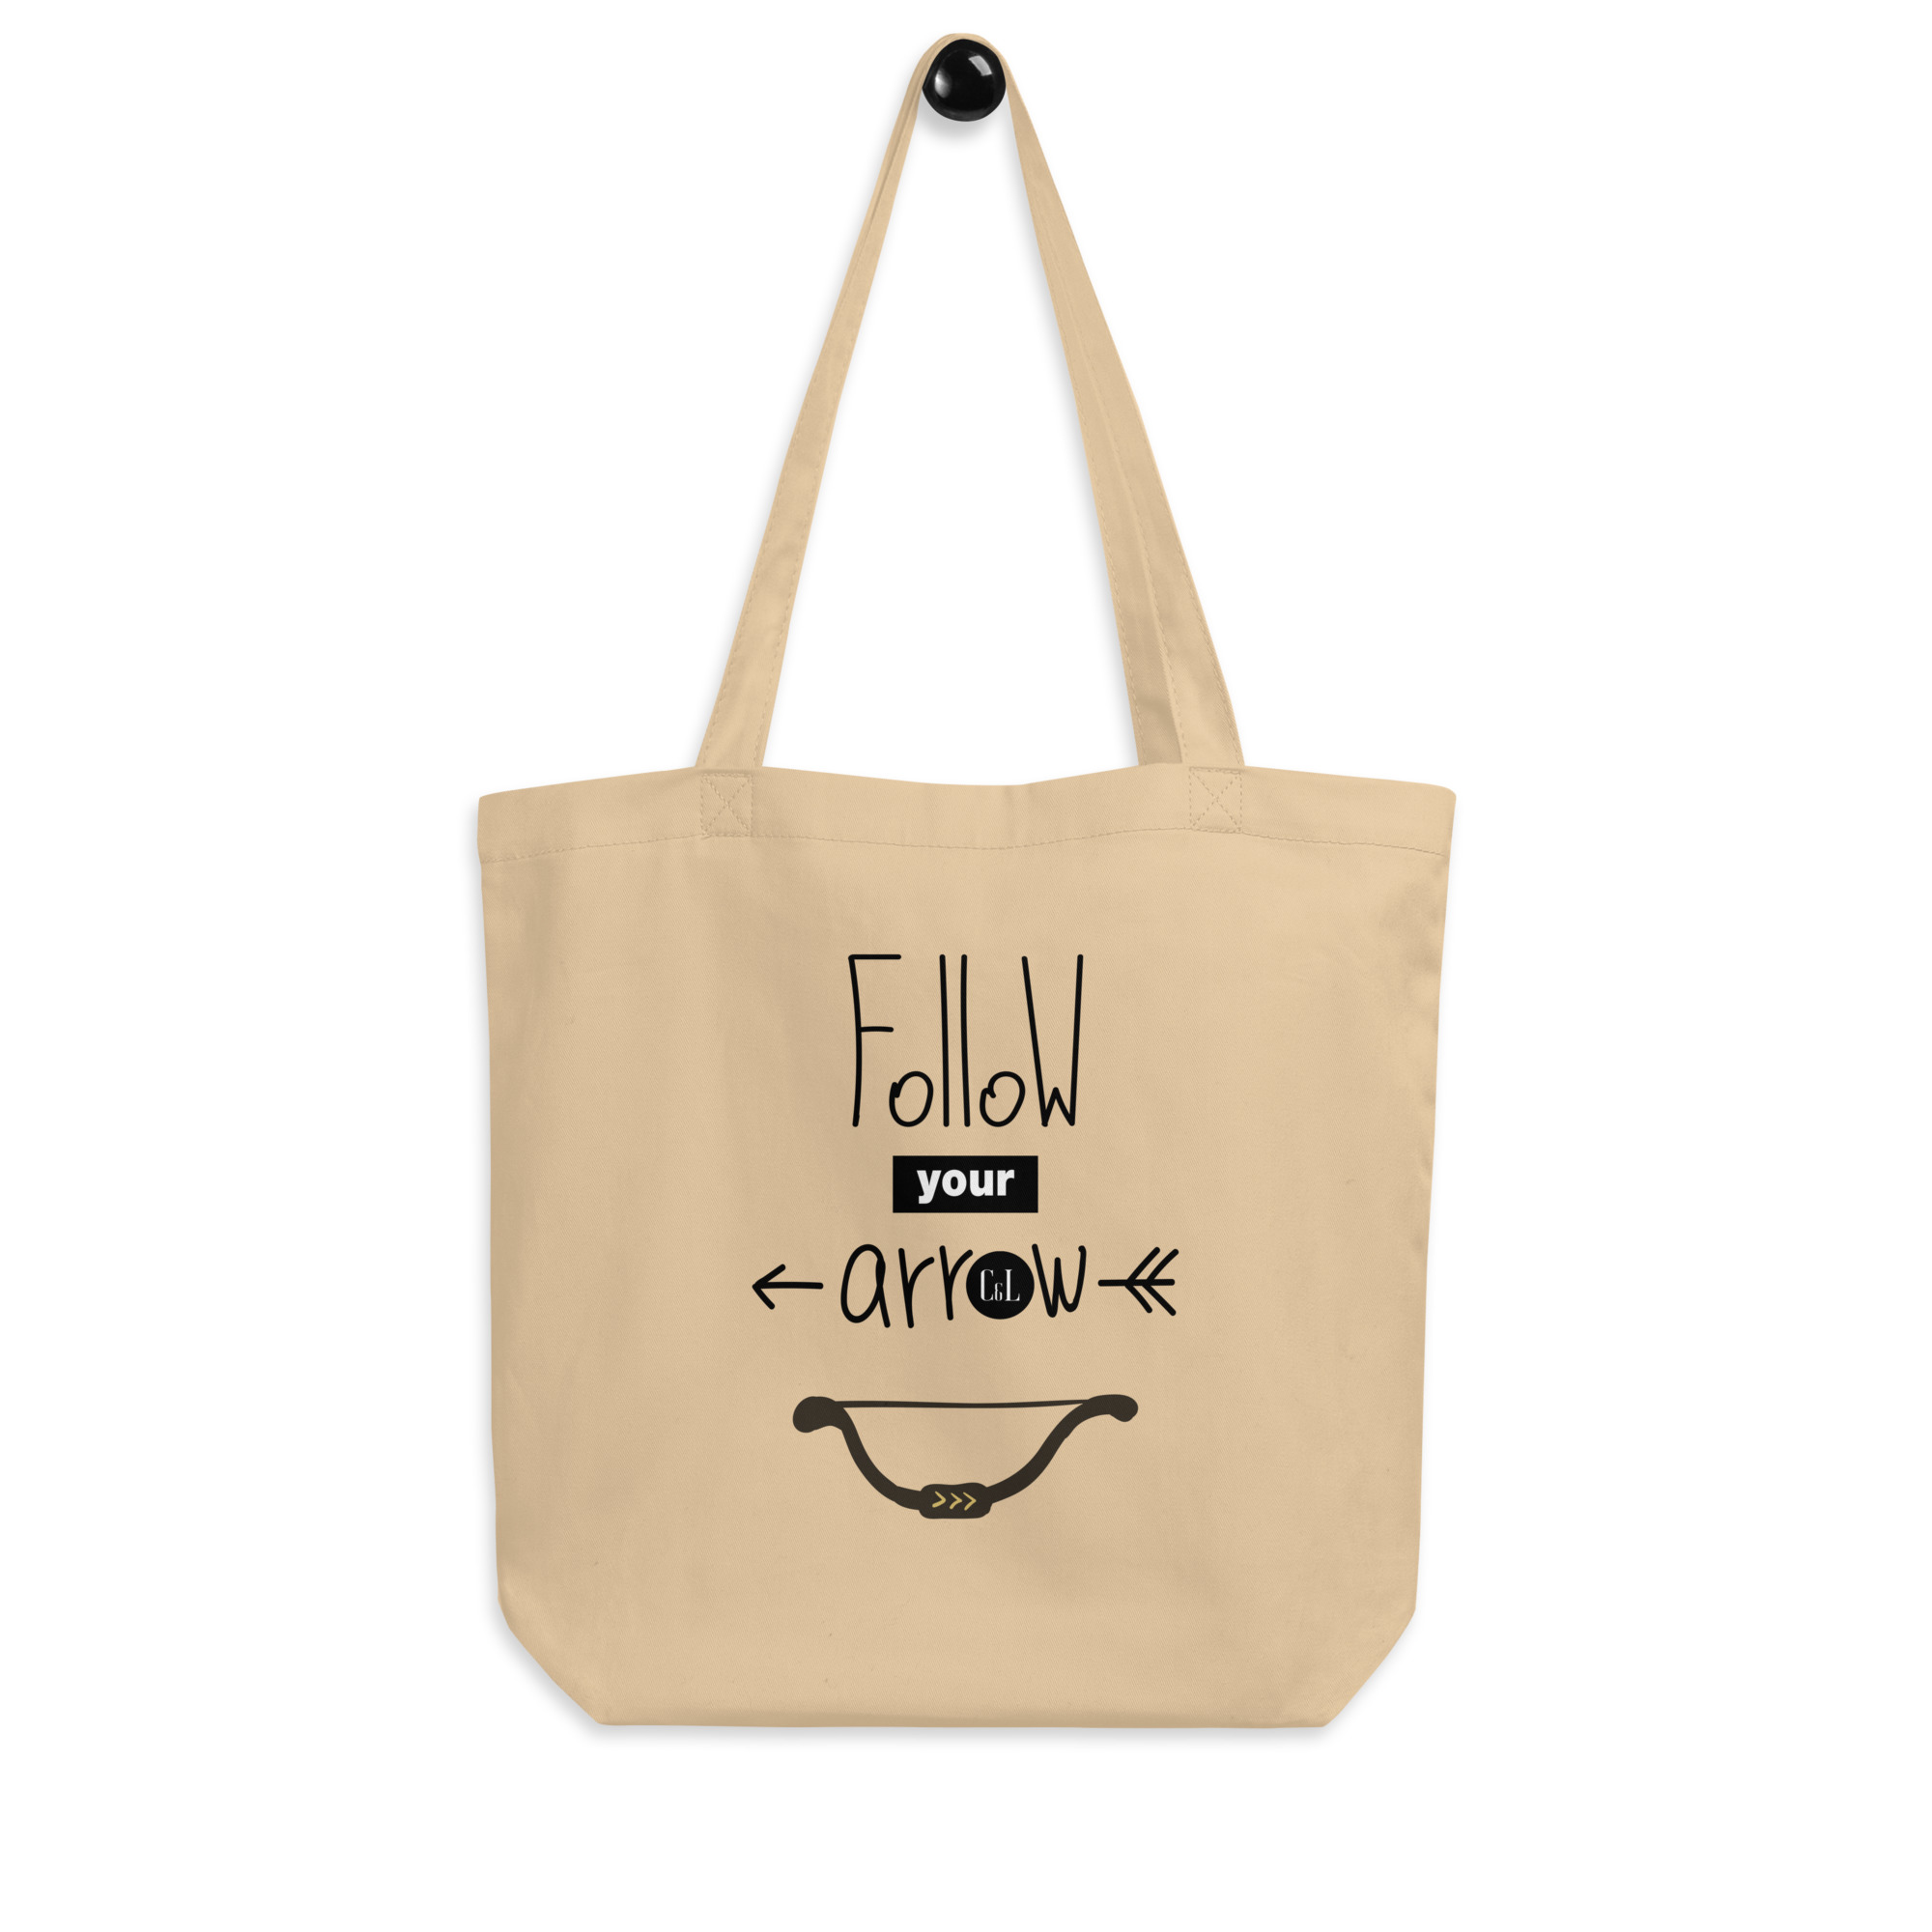 eco-tote-bag-oyster-front-648053d476966.jpg